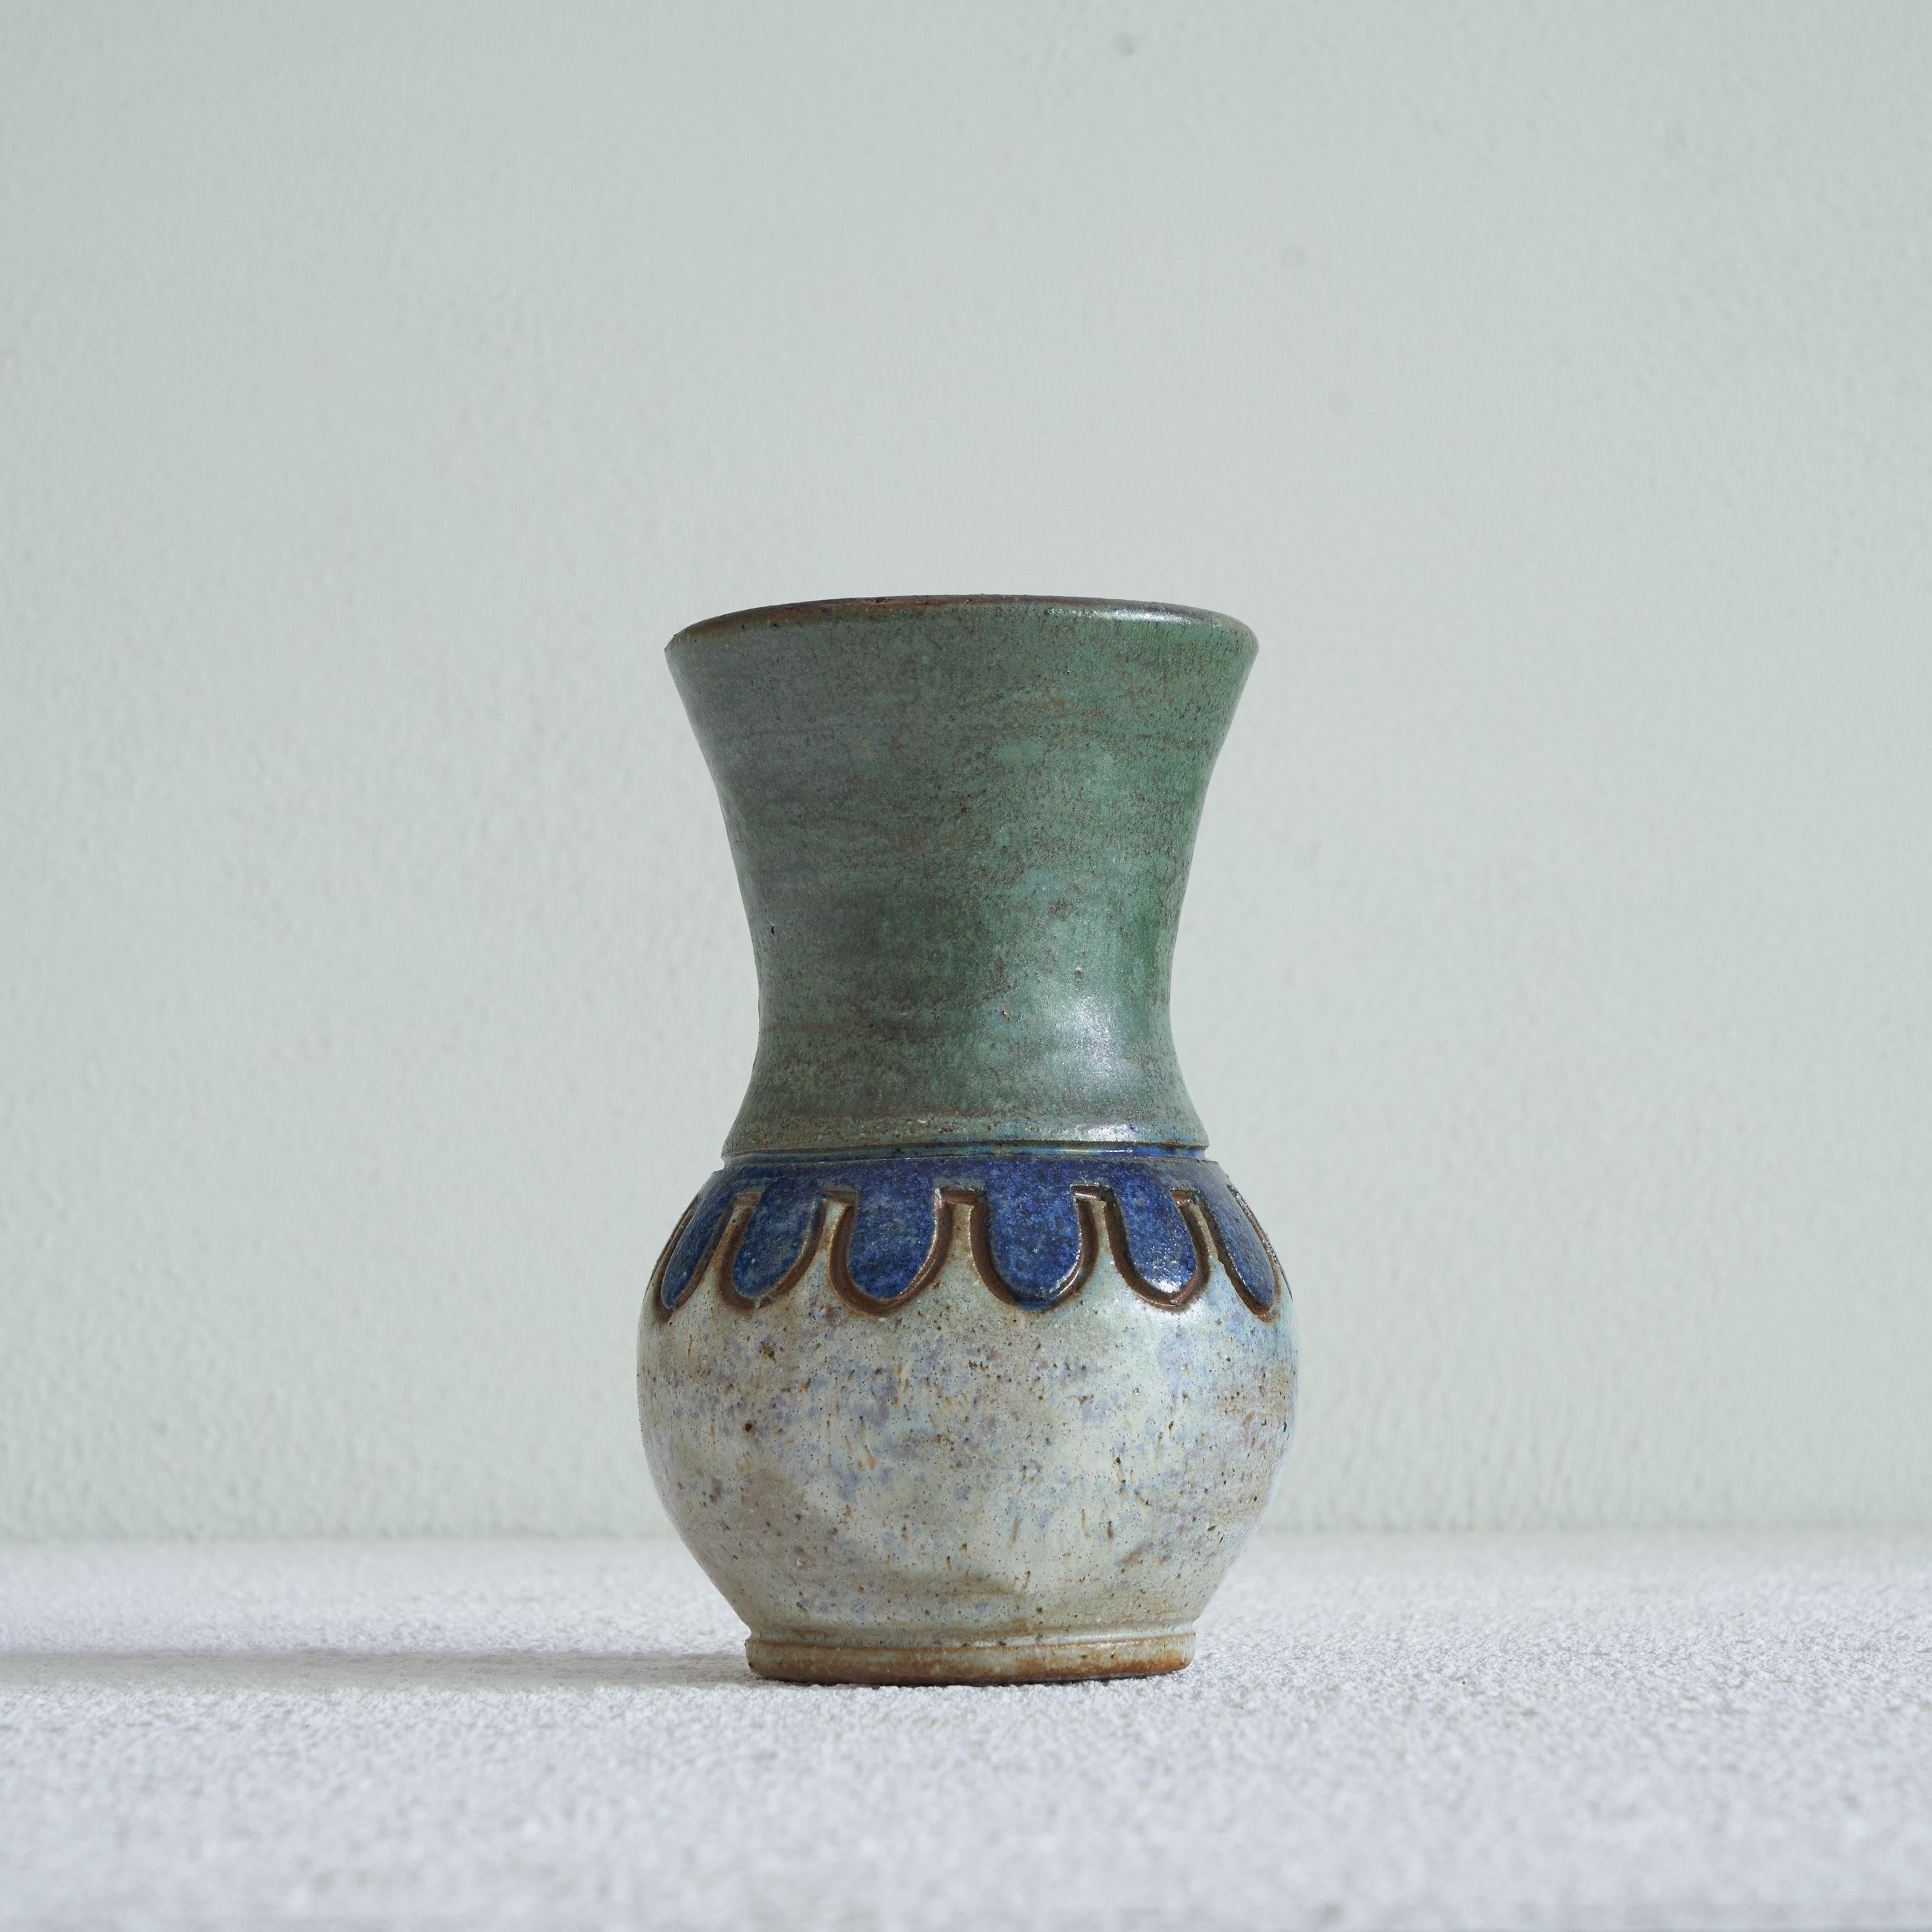 Antoine Dubois Studio Pottery Vase. Mons, Belgium, mid 20th century.

This is an exquisite piece of mid-century Belgian studio pottery, made by Antoine Dubois from Mons. There were several high quality studio pottery workshops around that